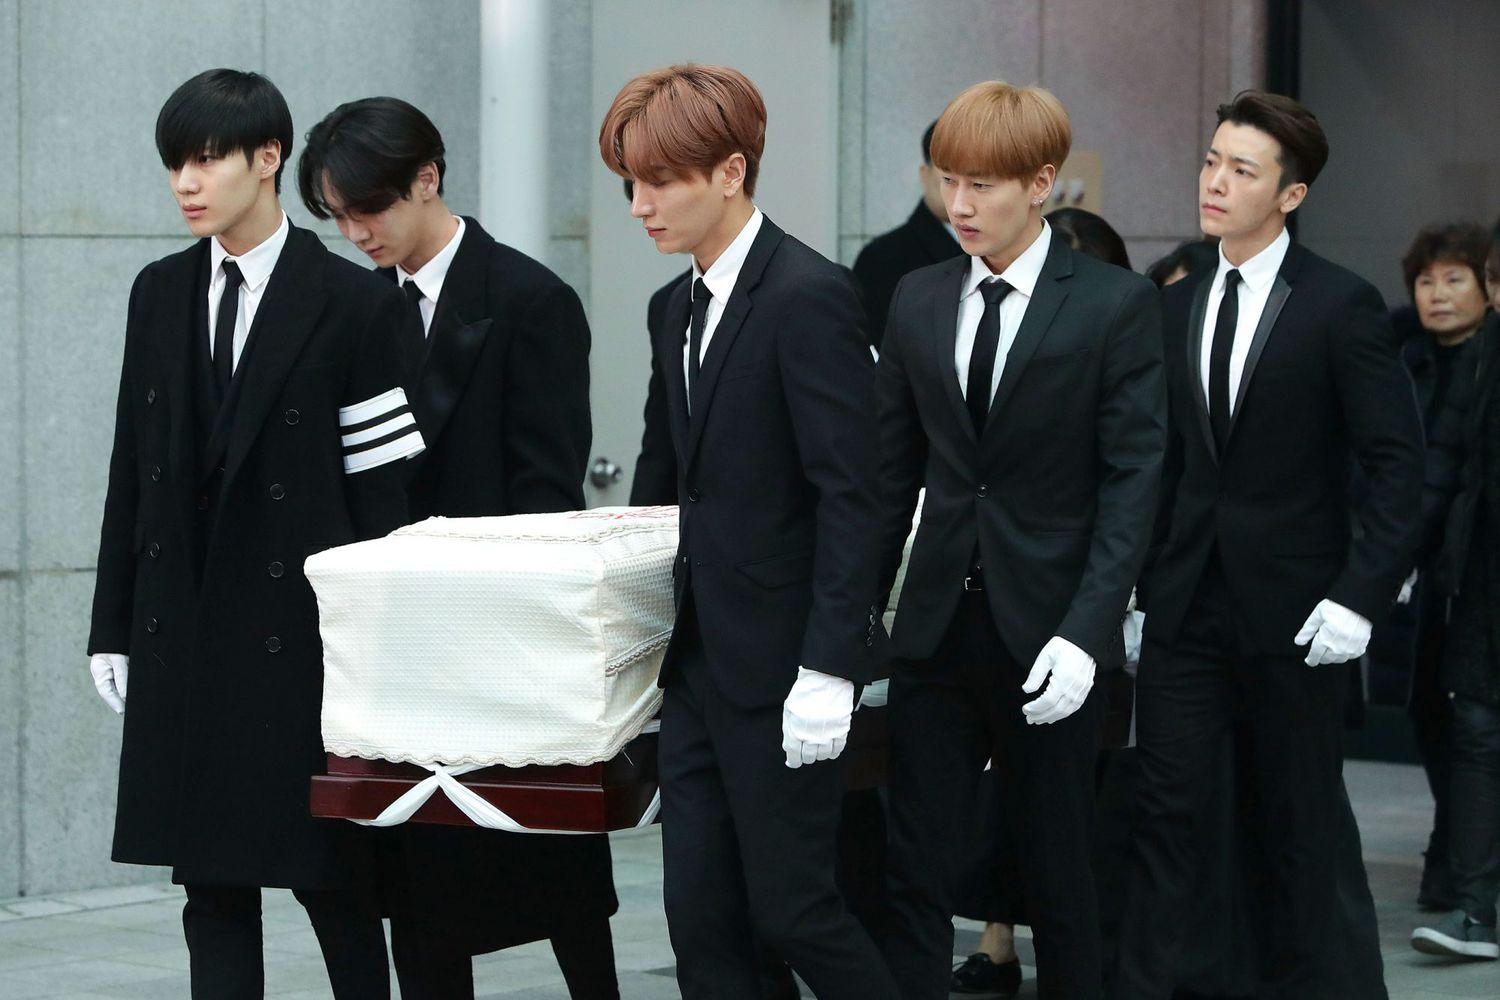 Funeral For Pop Idol Jonghyun of SHINee Takes Place